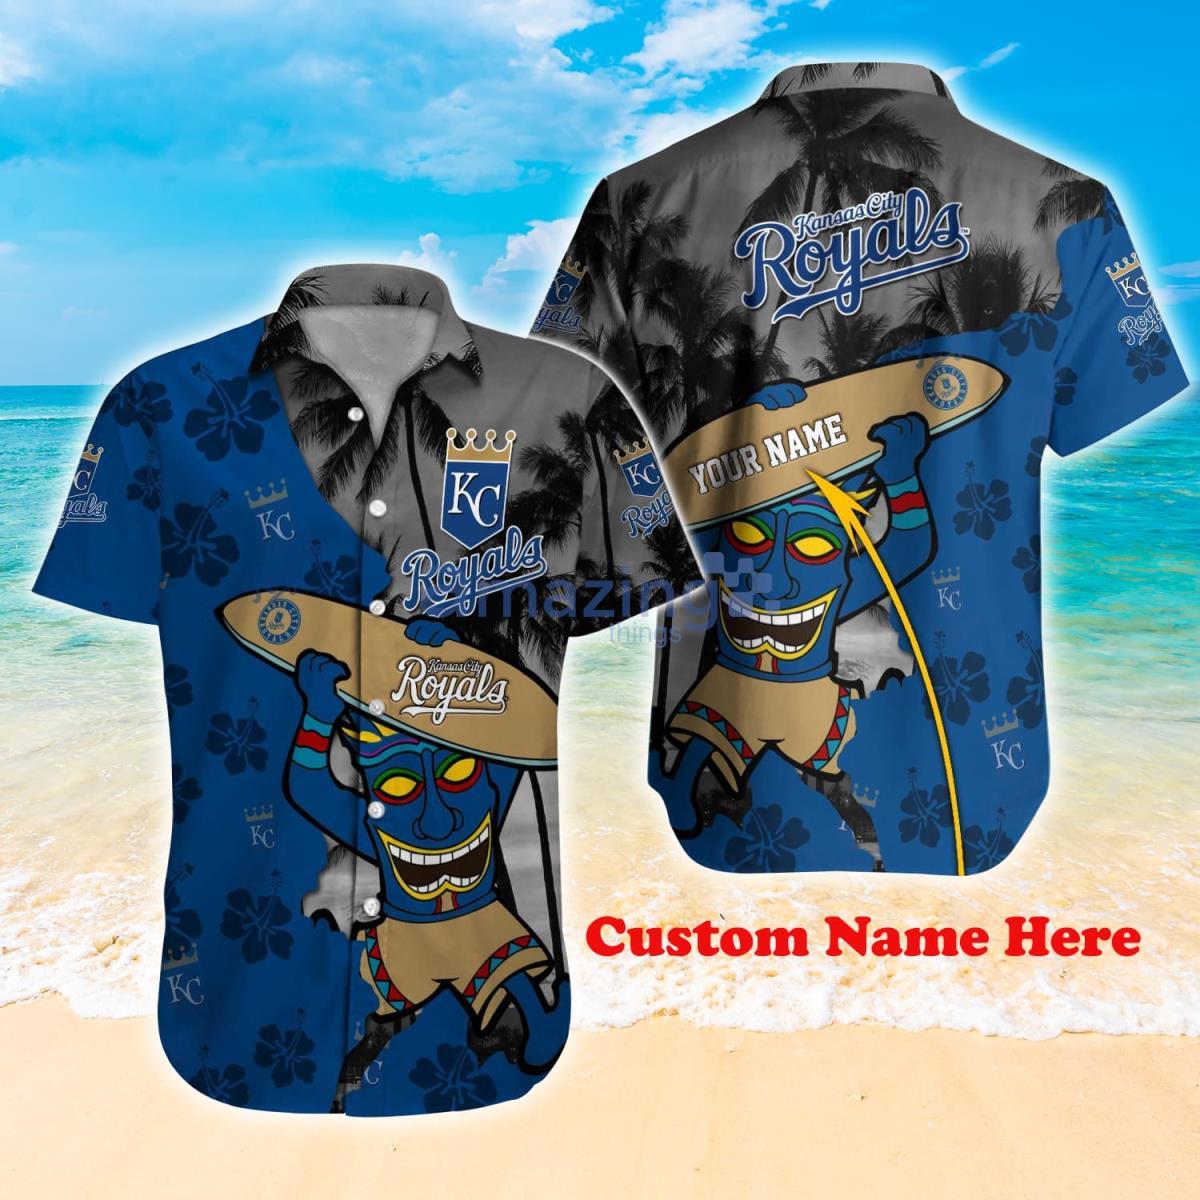 Kansas City Royals Personalized Jerseys Customized Shirts with Any Name and  Number